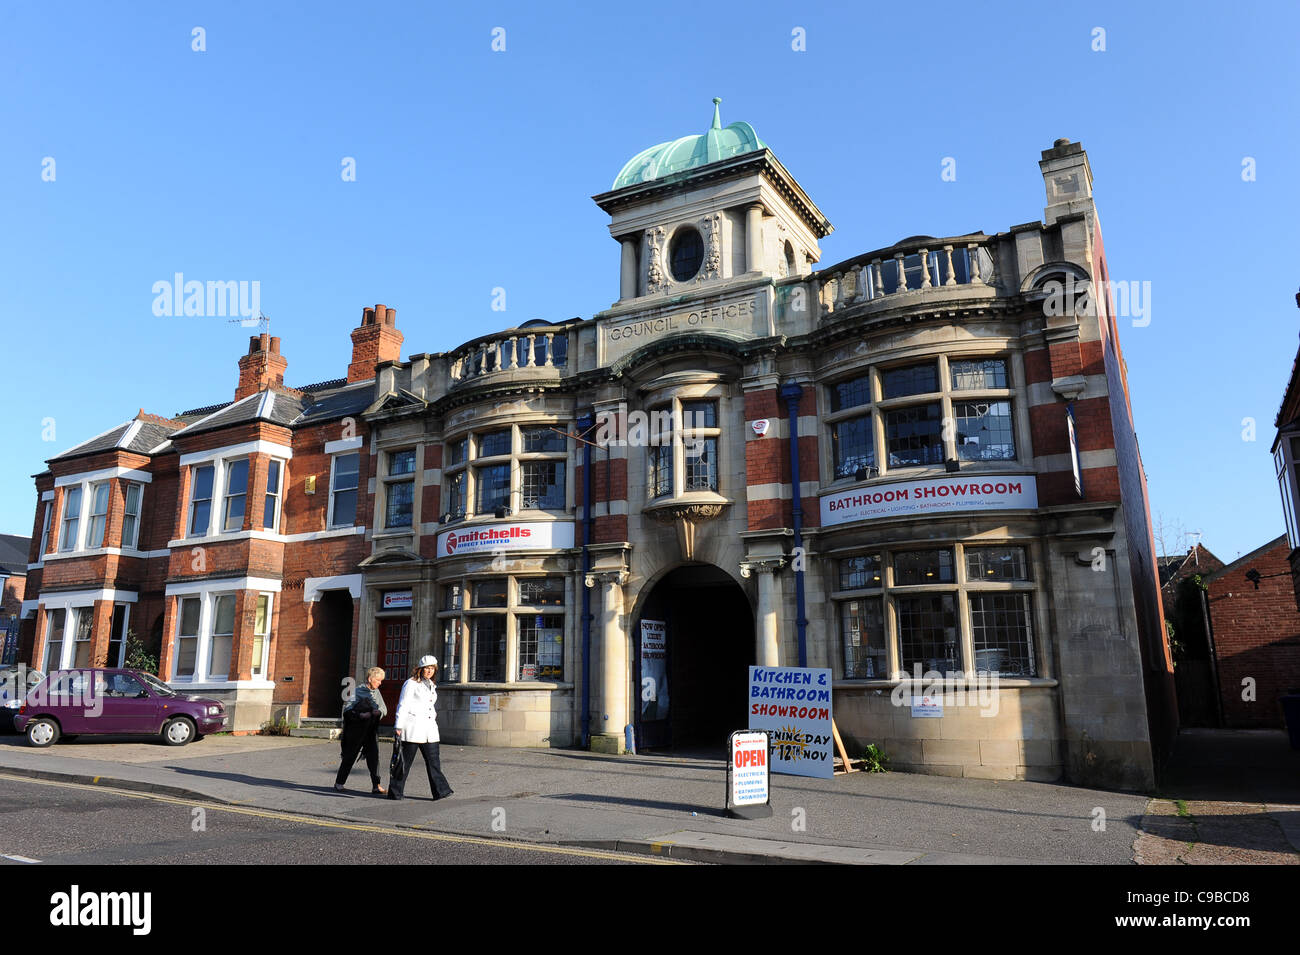 Former council offices in Worksop Nottinghamshire, England. Uk Stock Photo